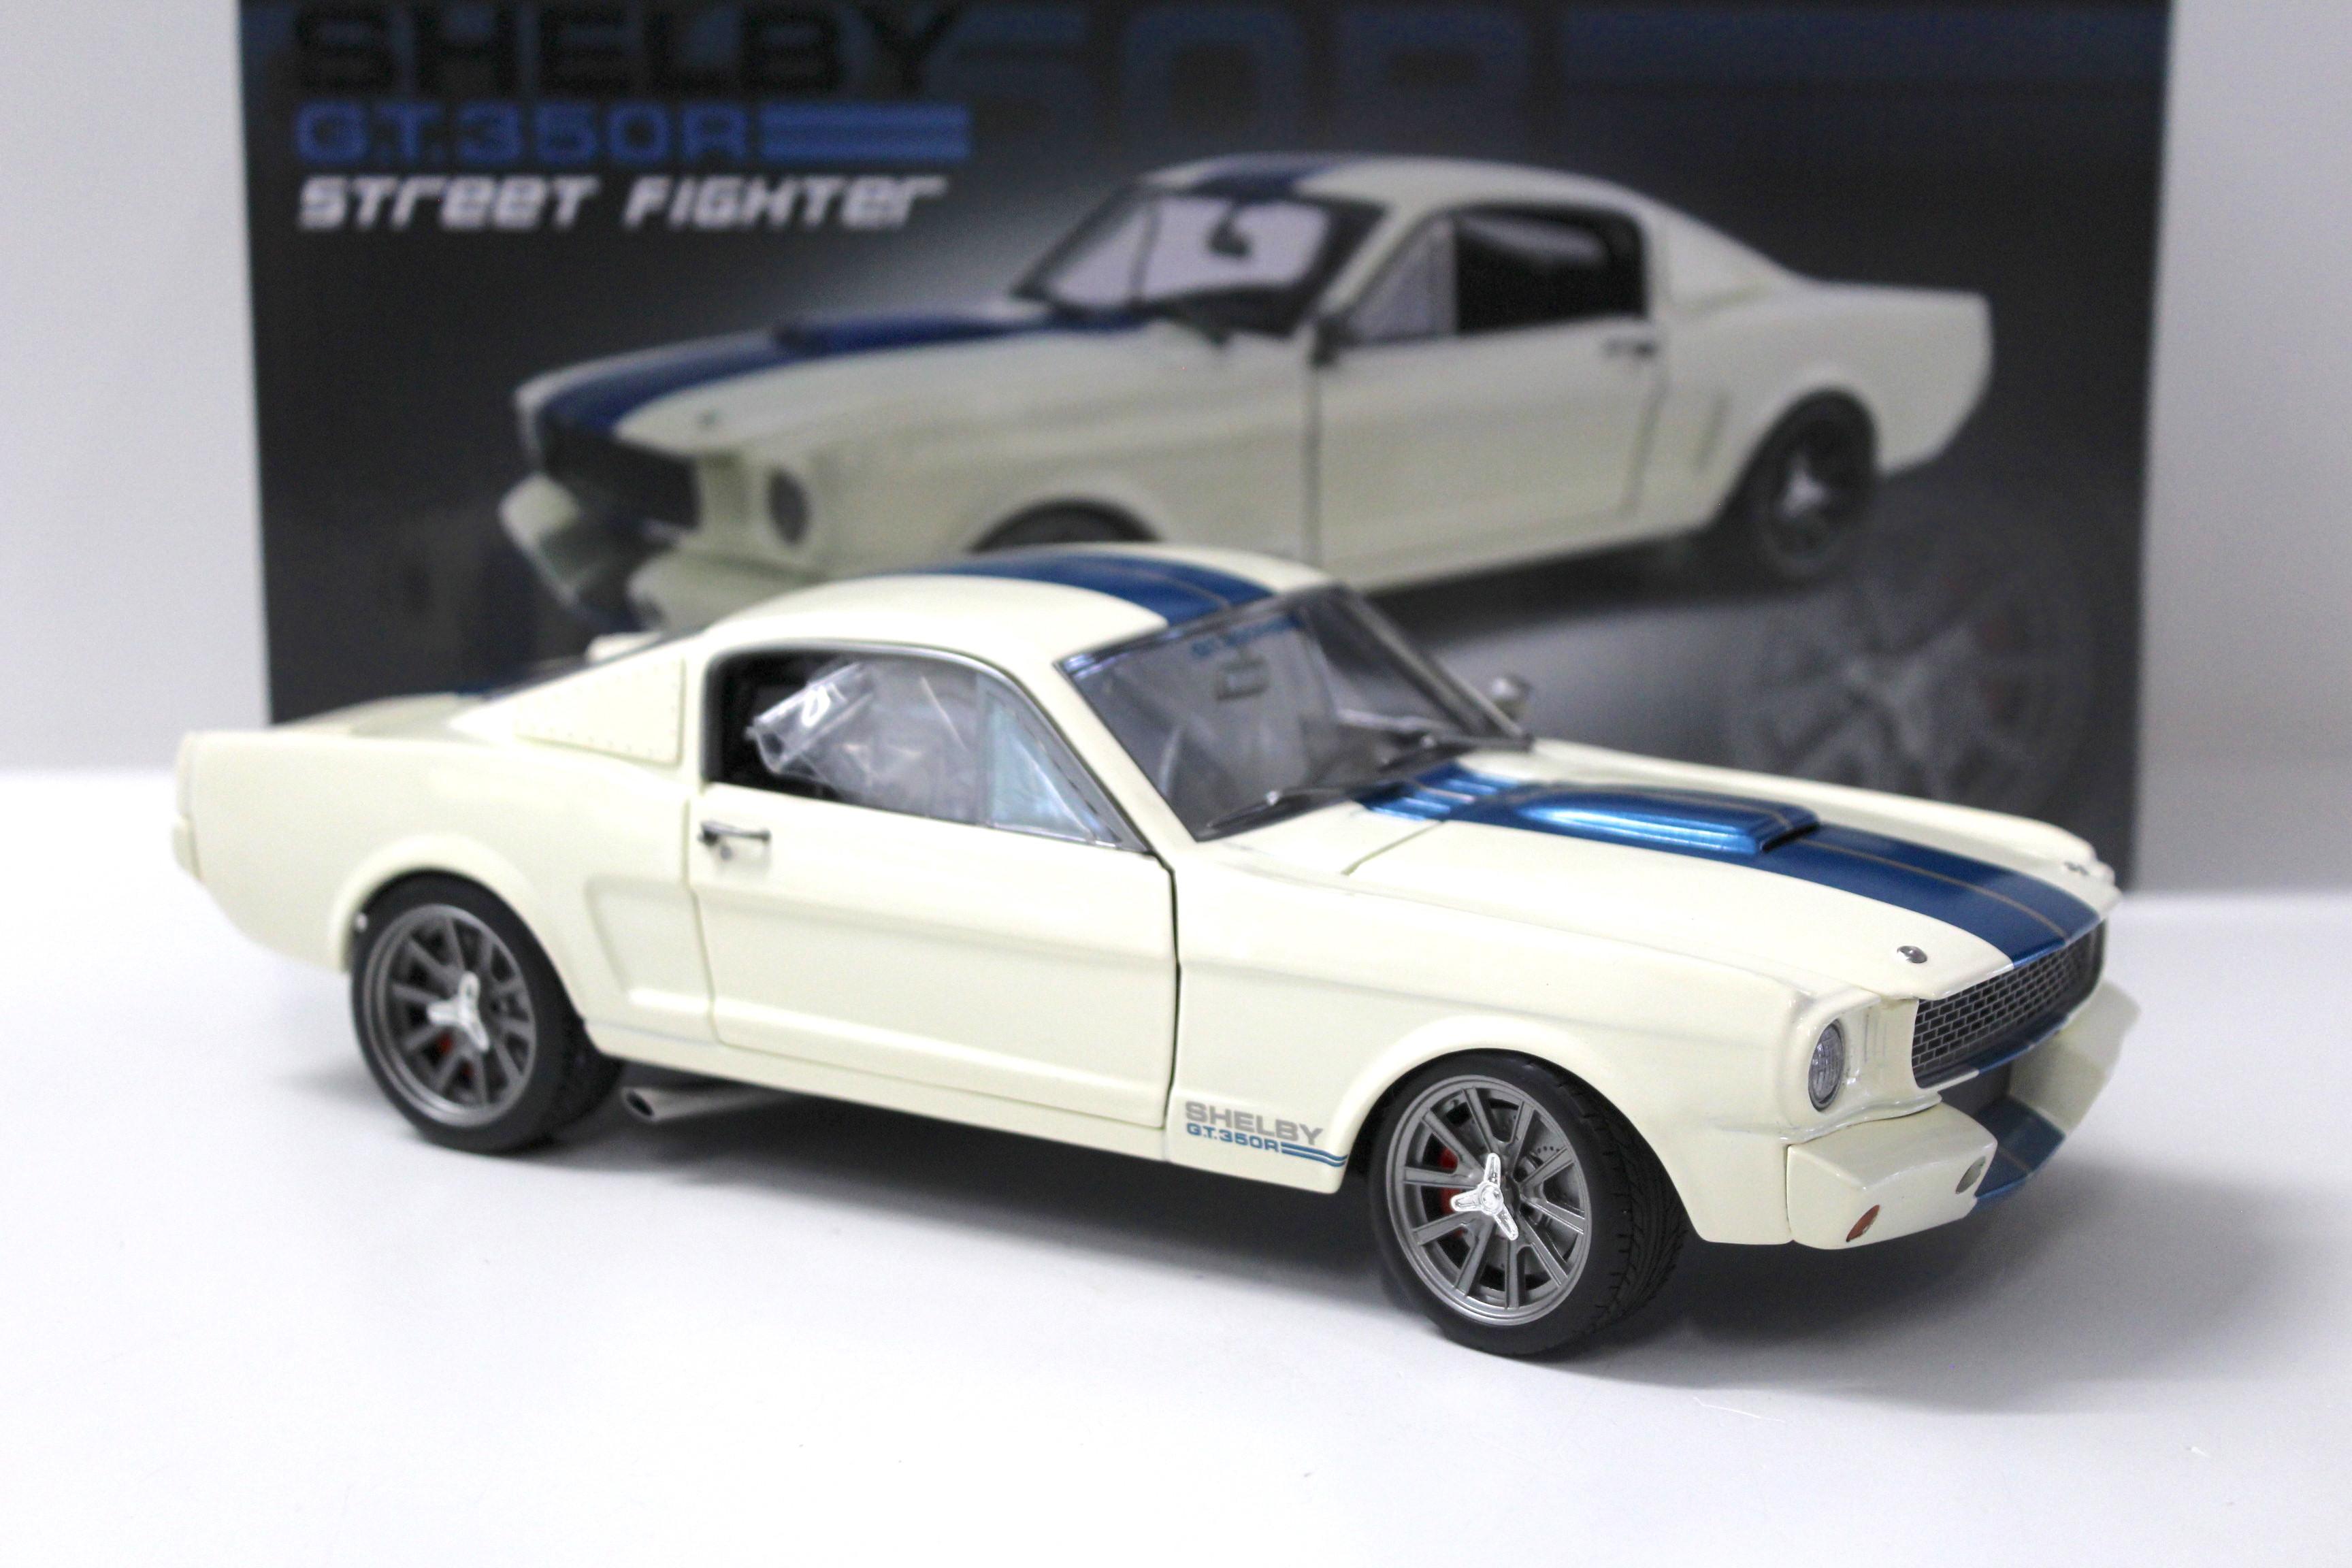 1:18 ACME 1965 Shelby GT350R Street Fighter white with blue stripes